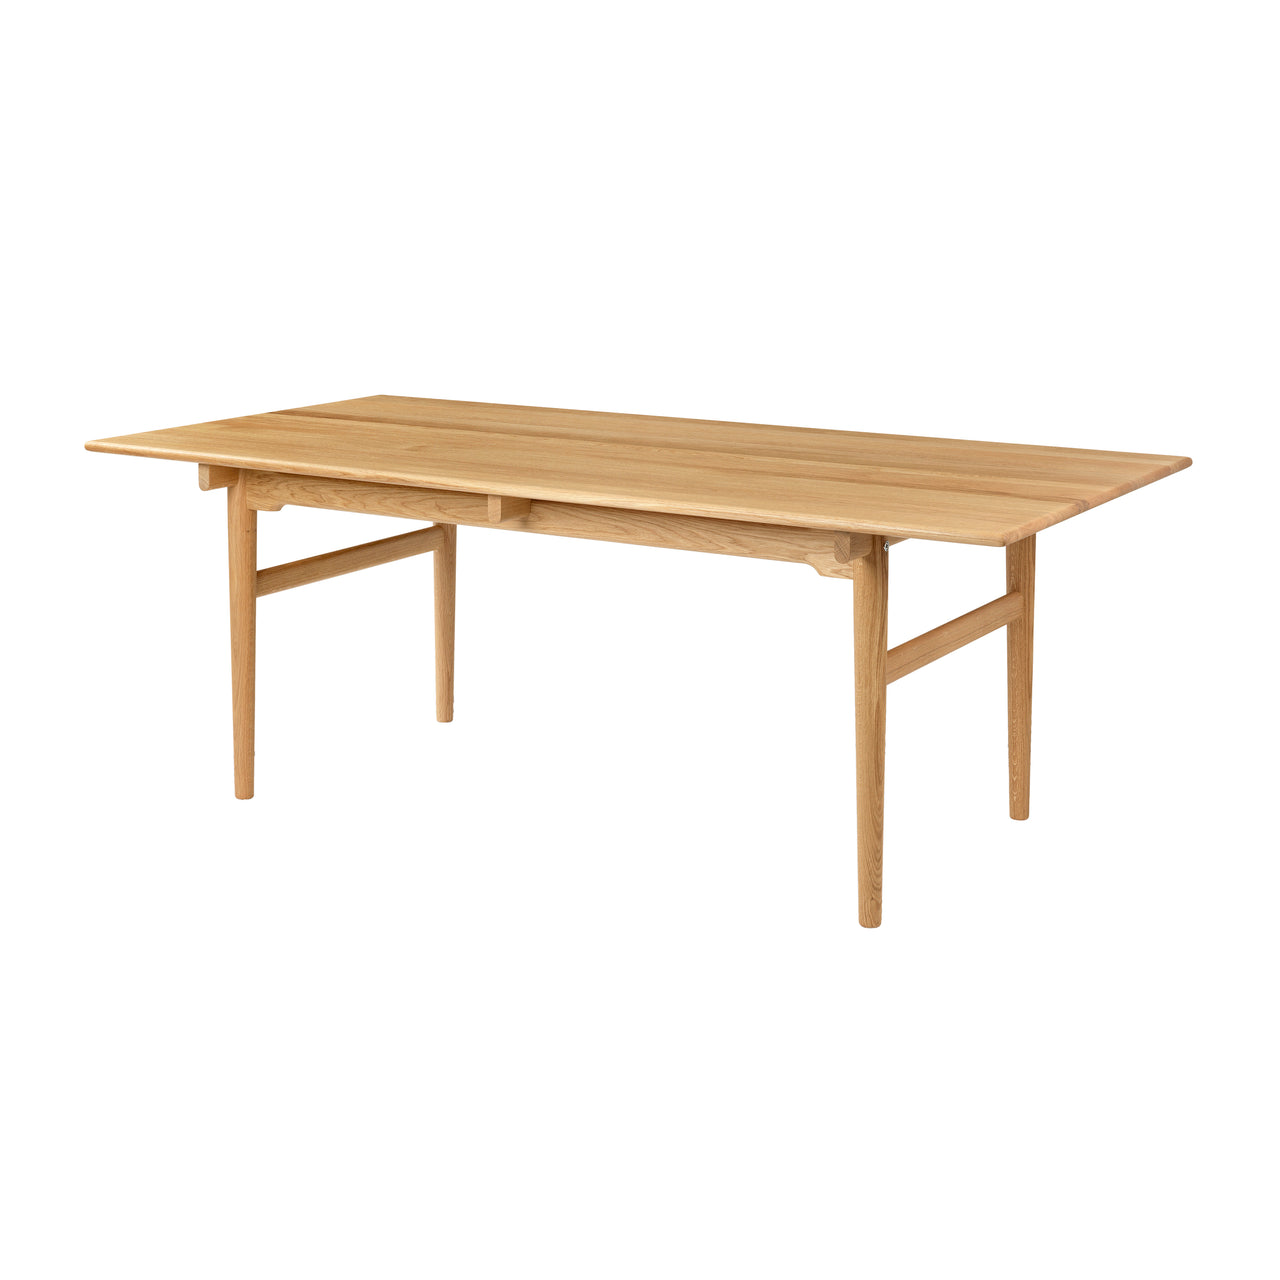 CH327 Dining Table: Small - 74.8